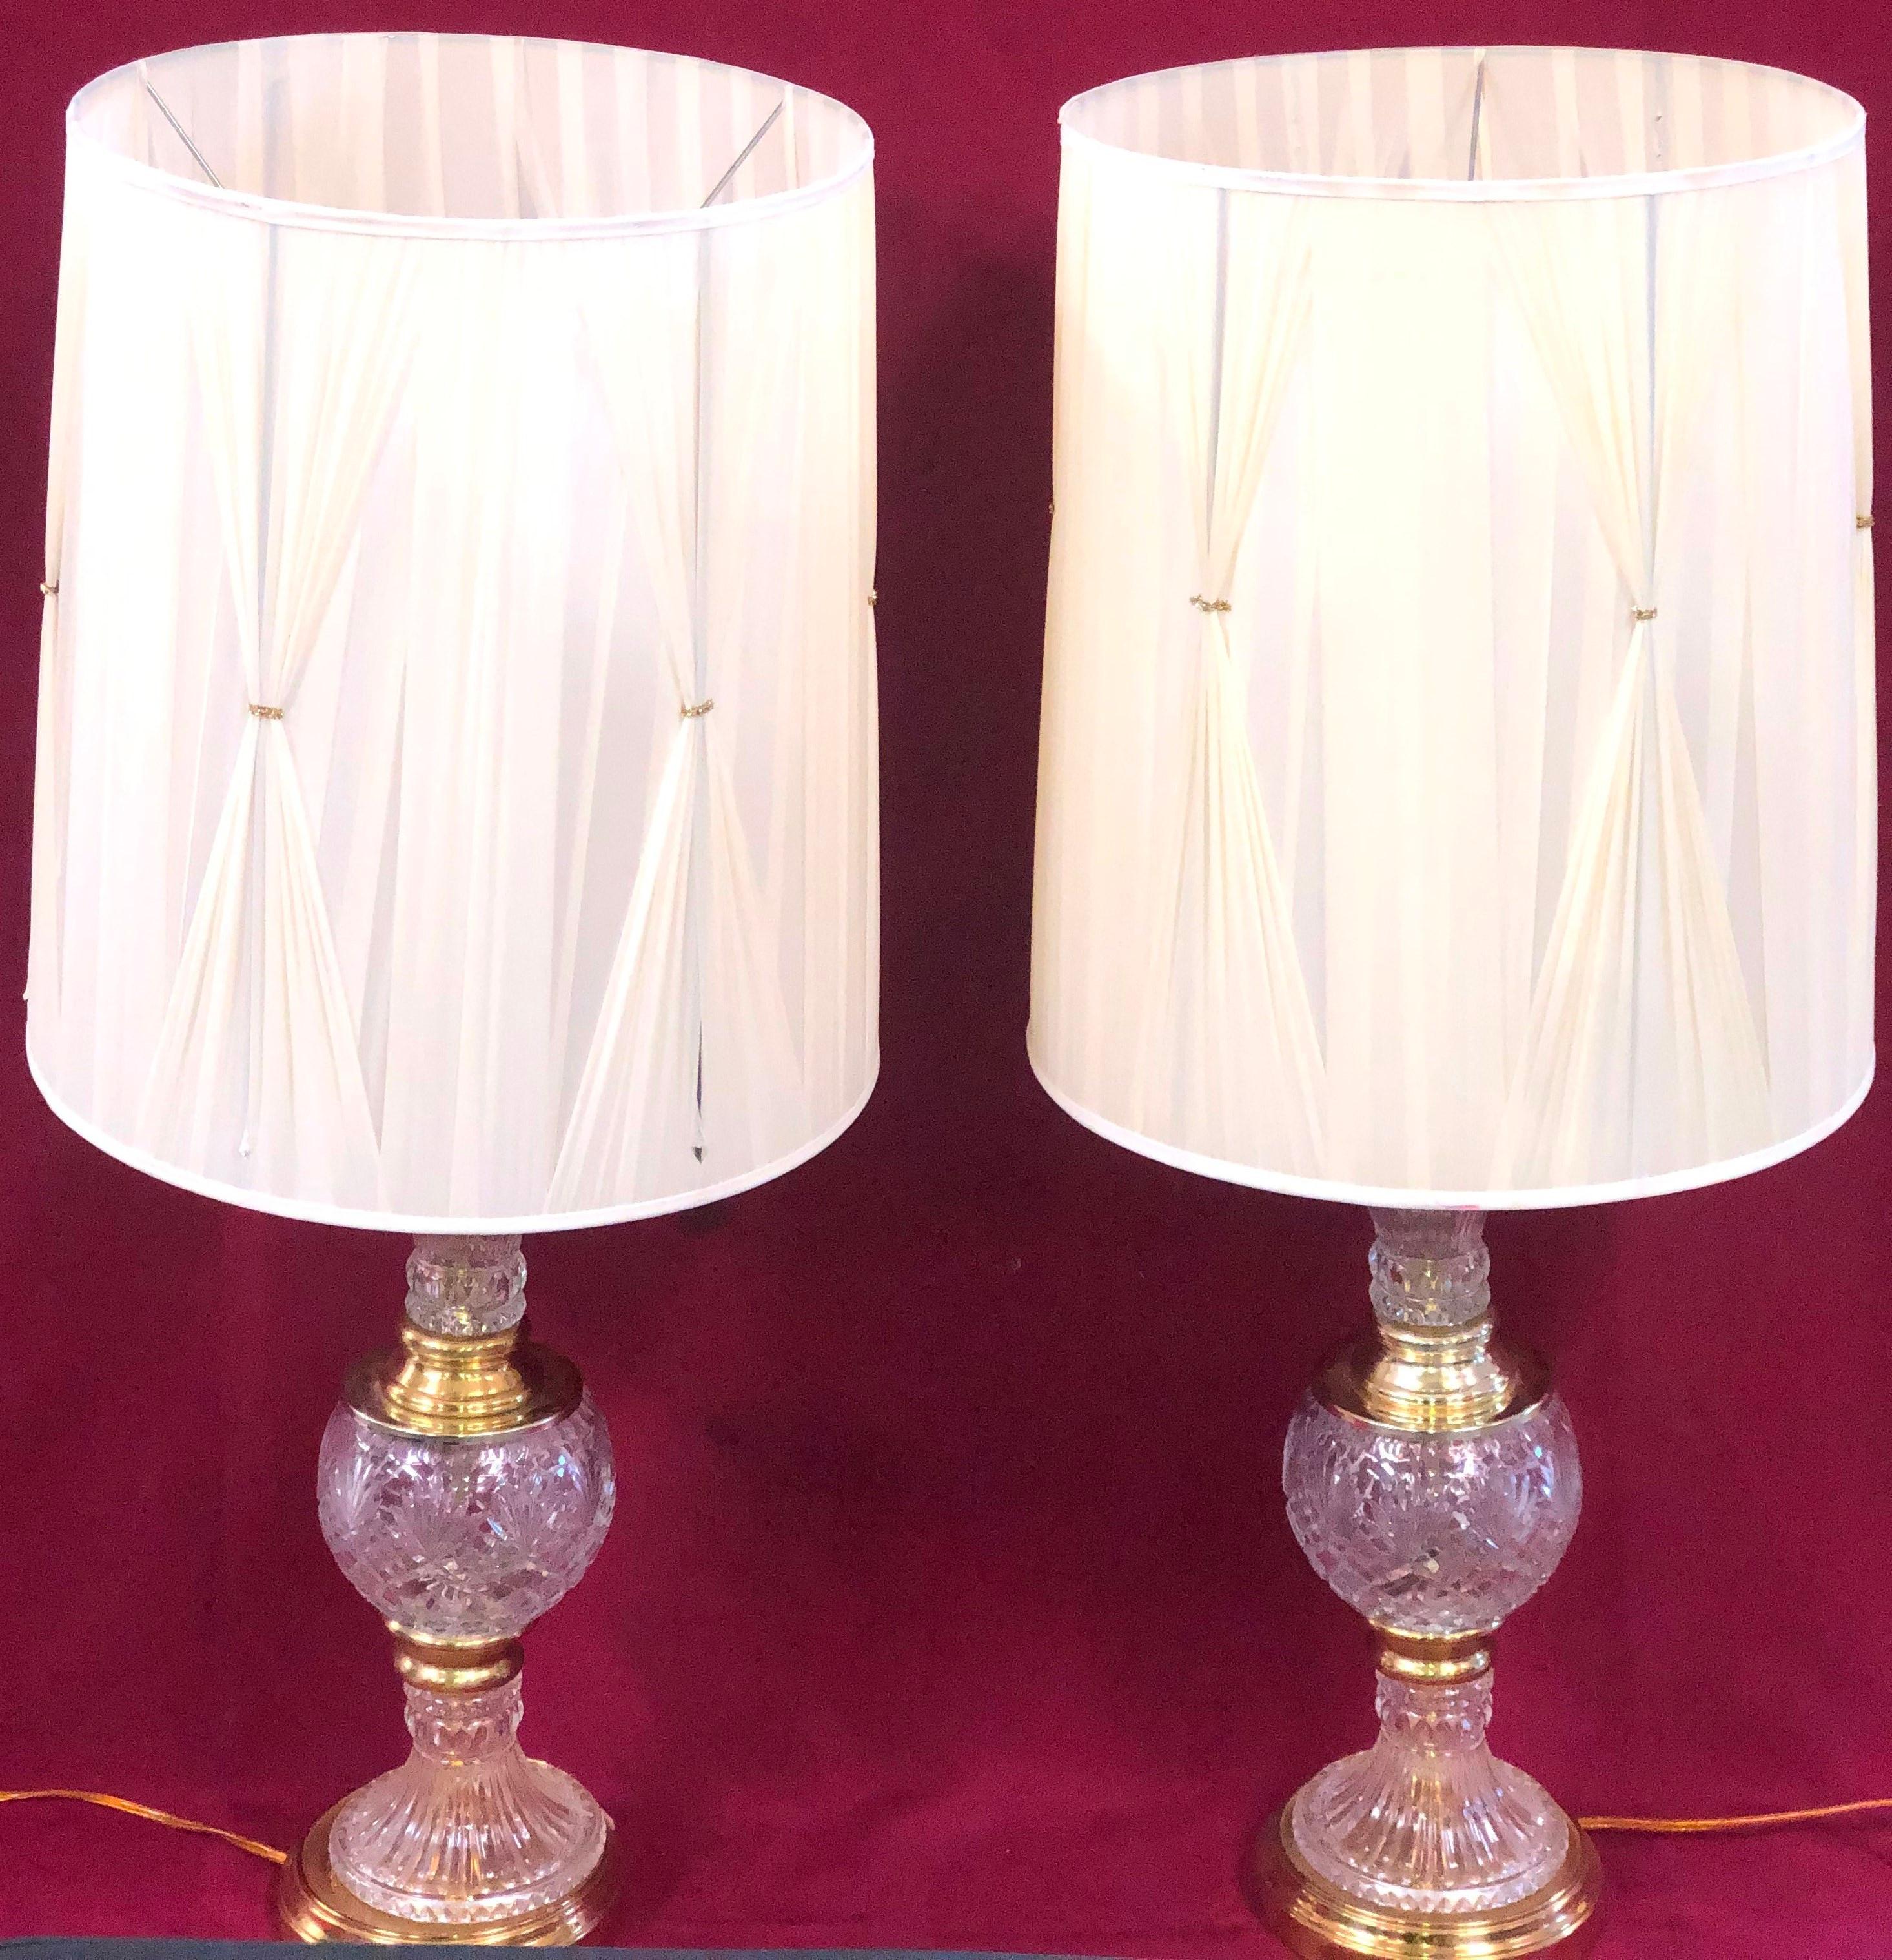 PAIR OF VINTAGE CRYSTAL & BRASS LAMPS - SEE PICS FOR DETAILS